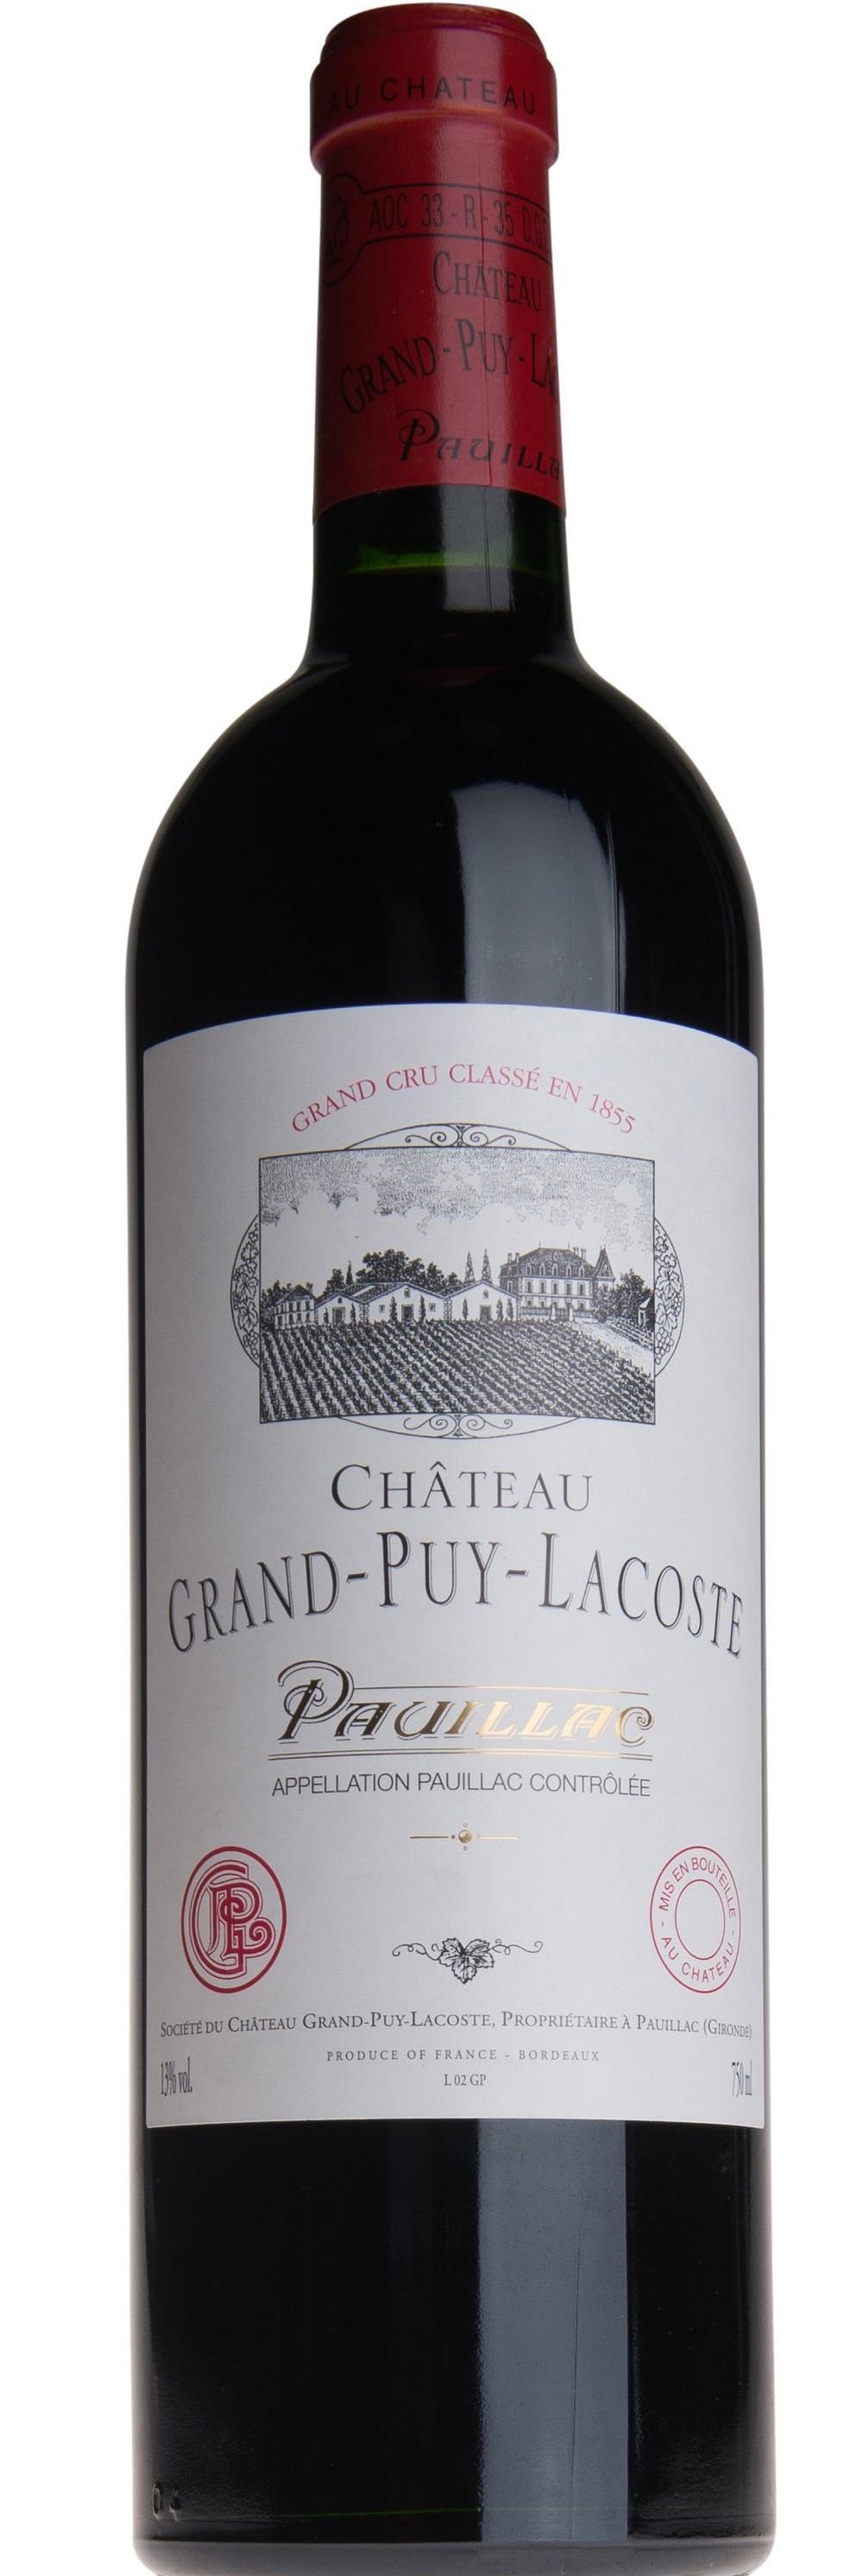 Chateau Grand-Puy-Lacoste Pauillac 2009